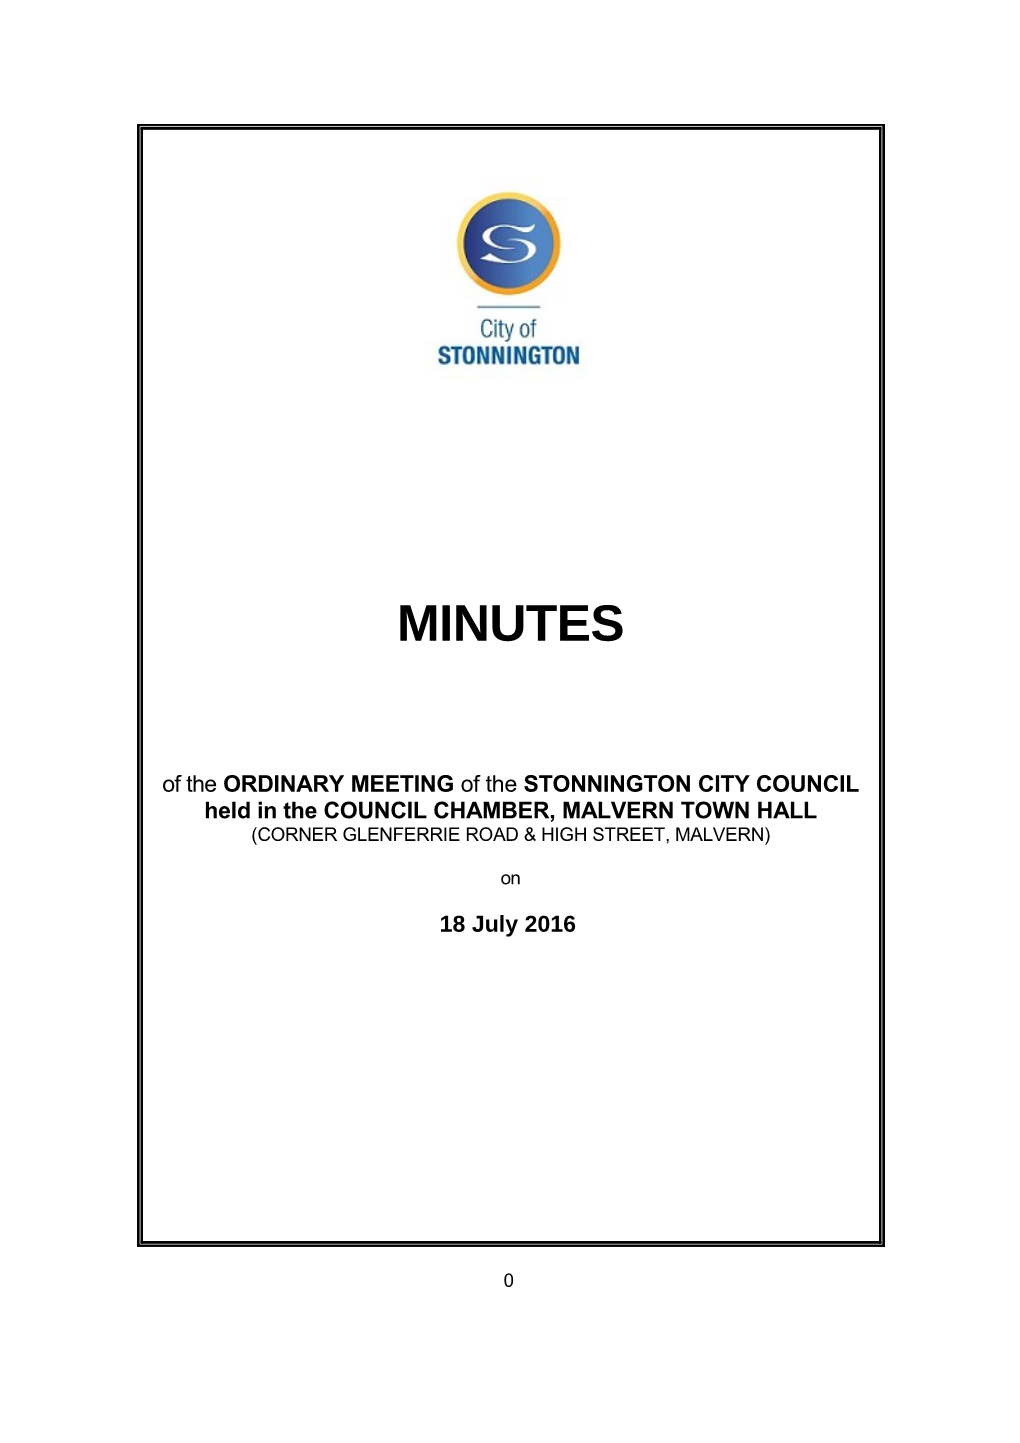 Minutes of Council Meeting - 18 July 2016